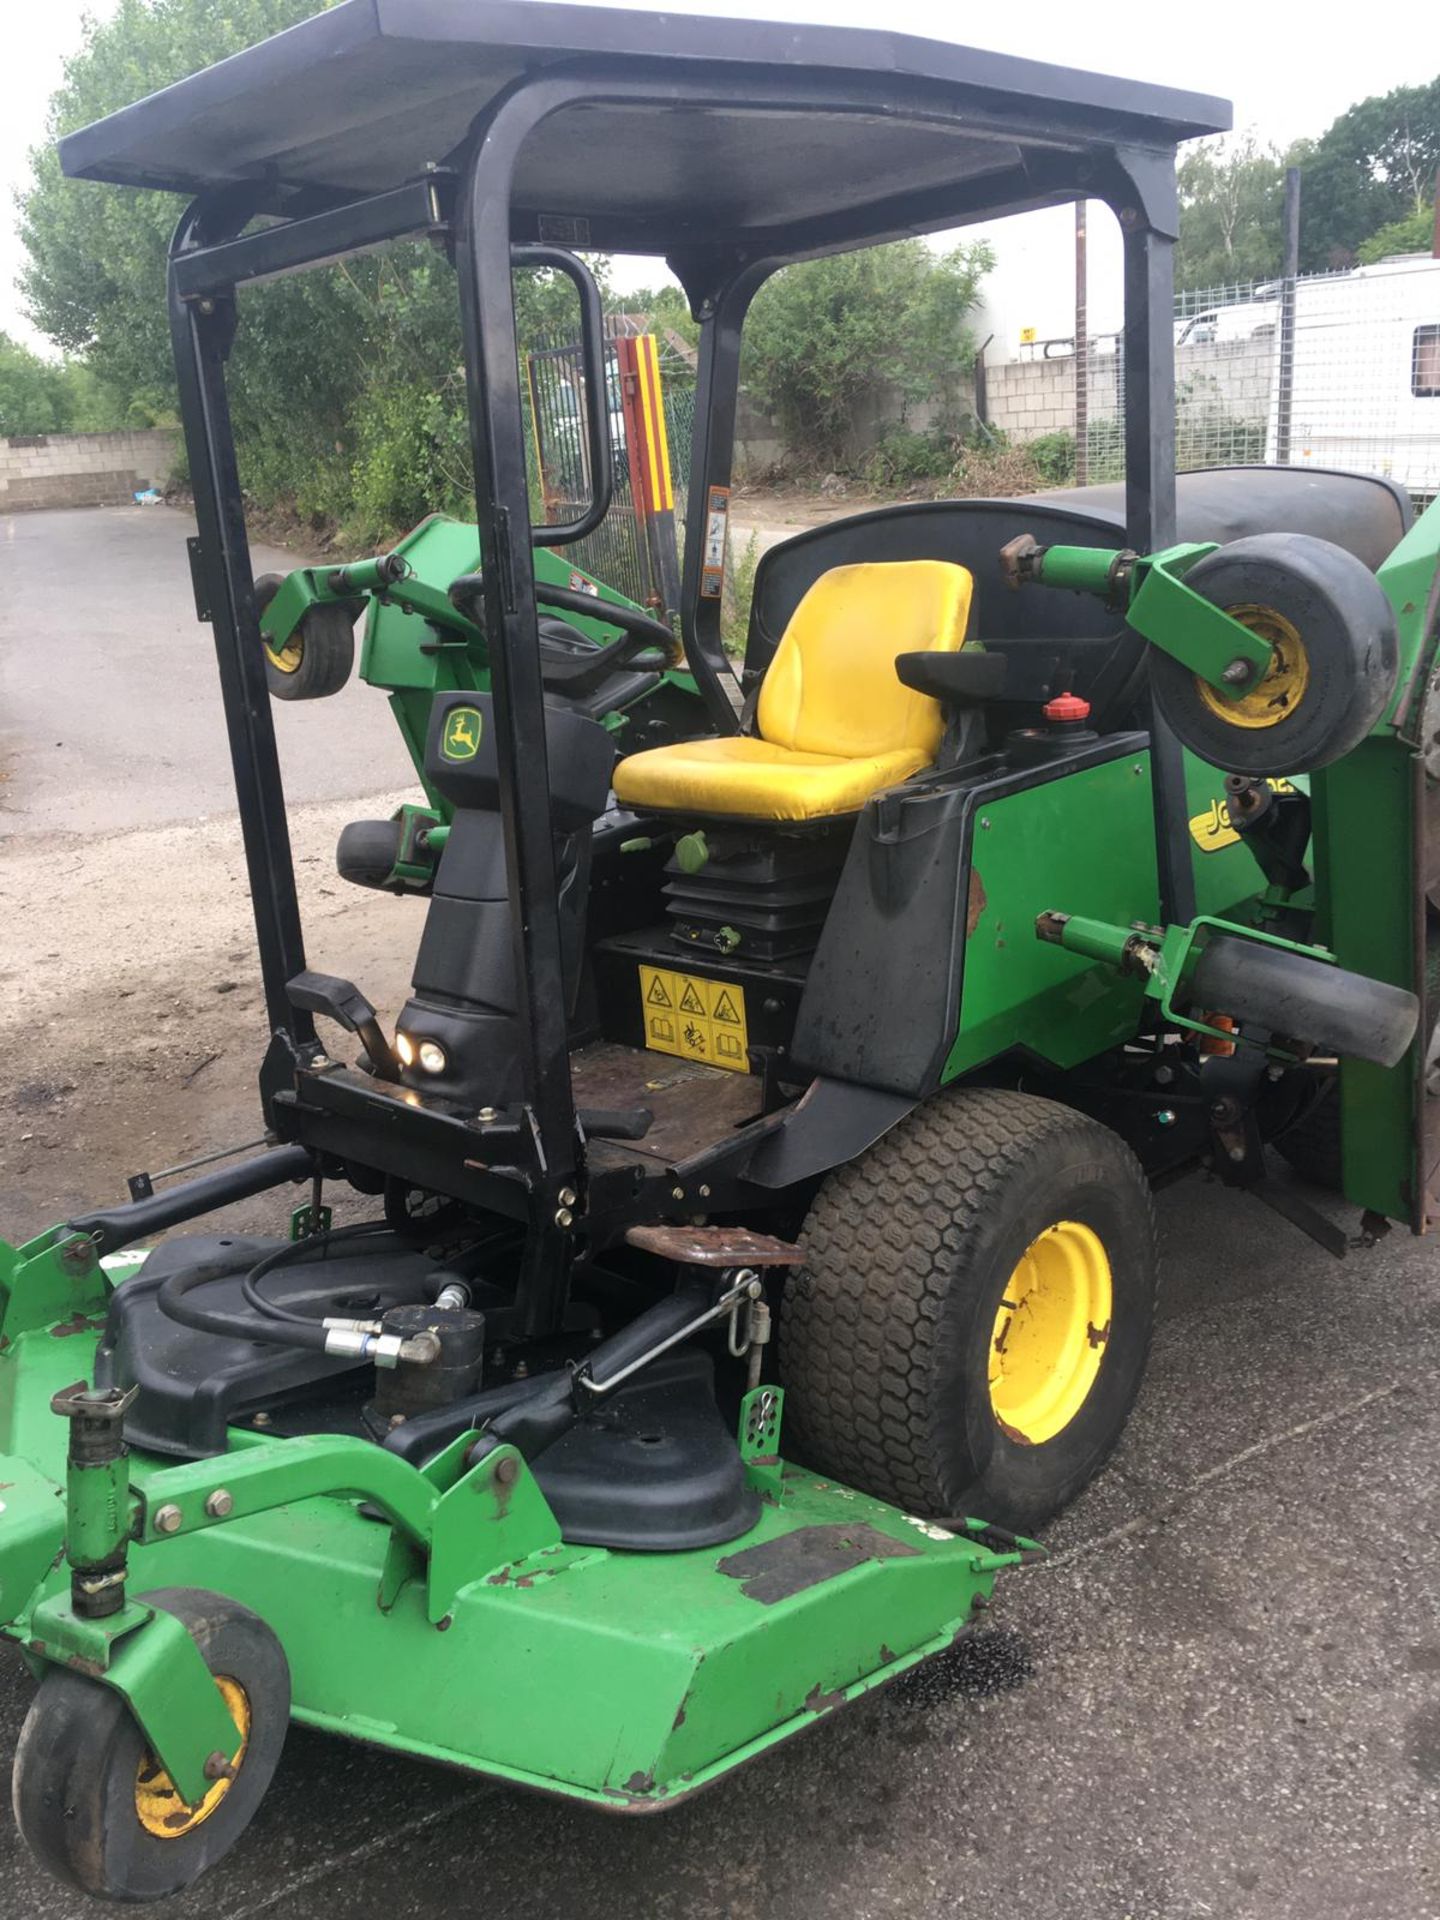 JOHN DEERE 1600 WIDE AREA TURBO BATWING RIDE ON LAWN MOWER, CRUISE CONTROL, RUNS & WORKS *NO VAT* - Image 9 of 24